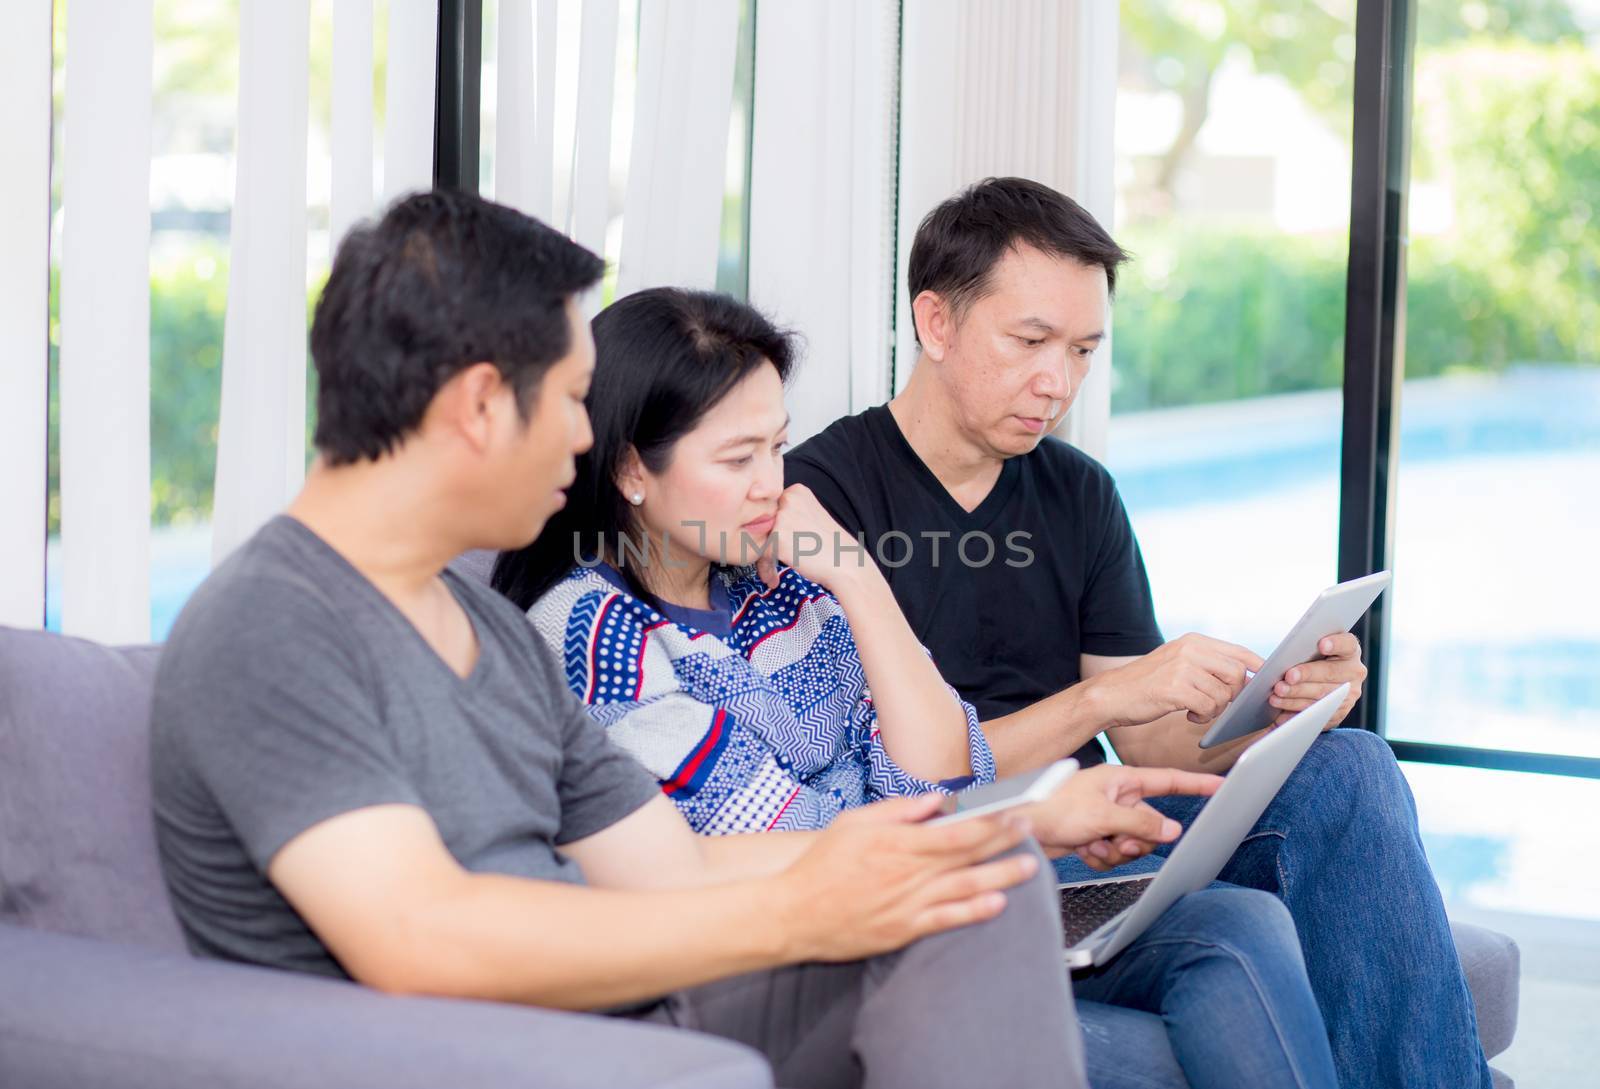 Three friends on line with multiple devices and talking sitting on a sofa in the living room in a house interior.